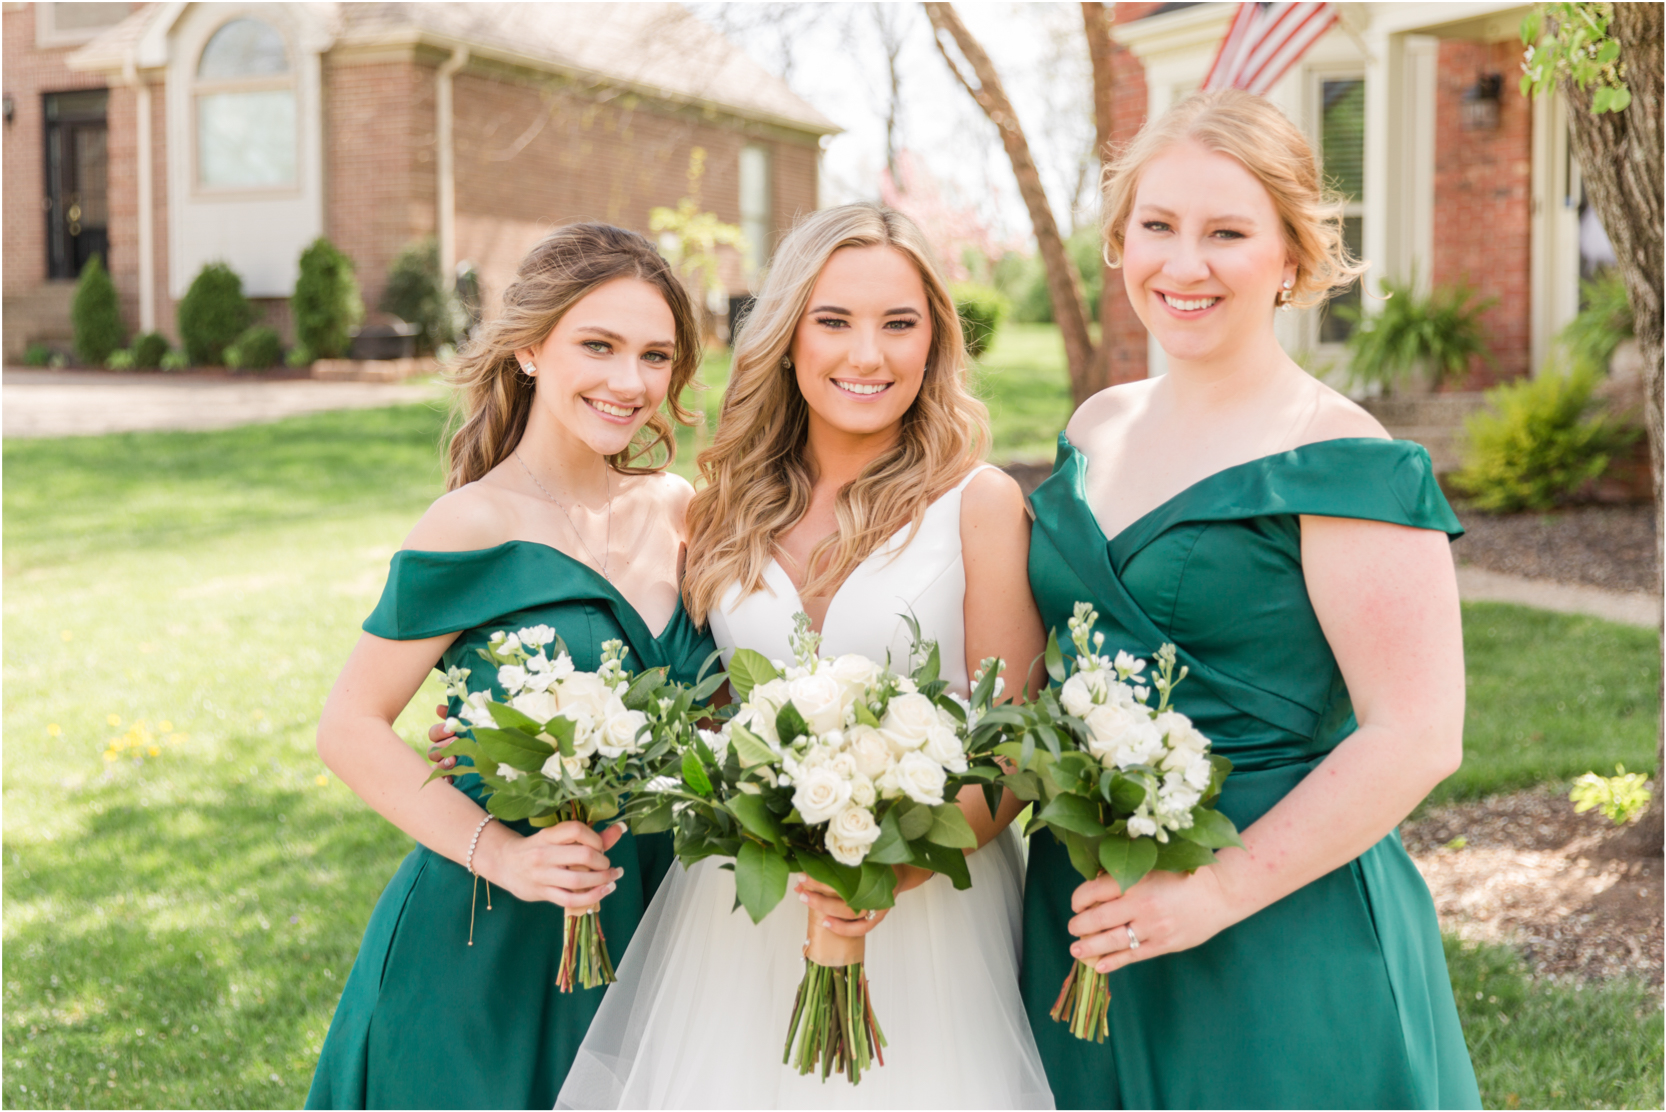 Bridesmaids Surprise First Look Emerald Green Dresses Louisville Kentucky Uniquely His Photography